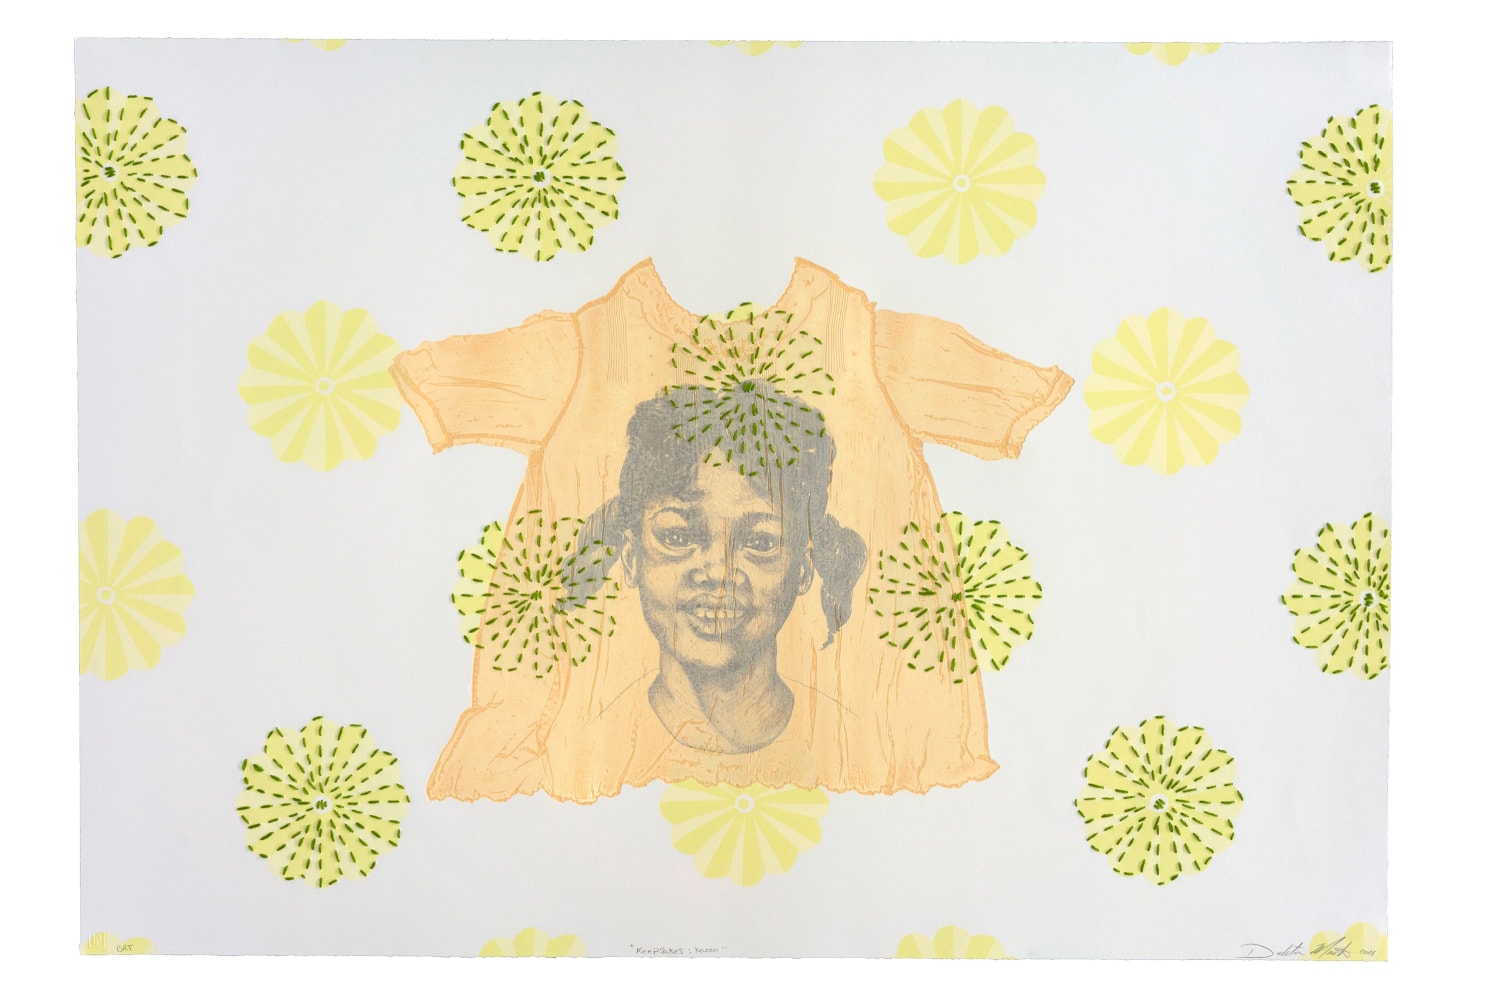 Karen&amp;nbsp;
Delita Martin, 2021&amp;nbsp;

Lithography with collagraph and hand stitching
29&amp;quot; x 41 &amp;frac12;&amp;quot;&amp;nbsp;
Edition of 20
$3,500; (Contact for suite price)&amp;nbsp;

Printed and Published by&amp;nbsp;Highpoint Editions

INQUIRE

&amp;nbsp;

&amp;nbsp;